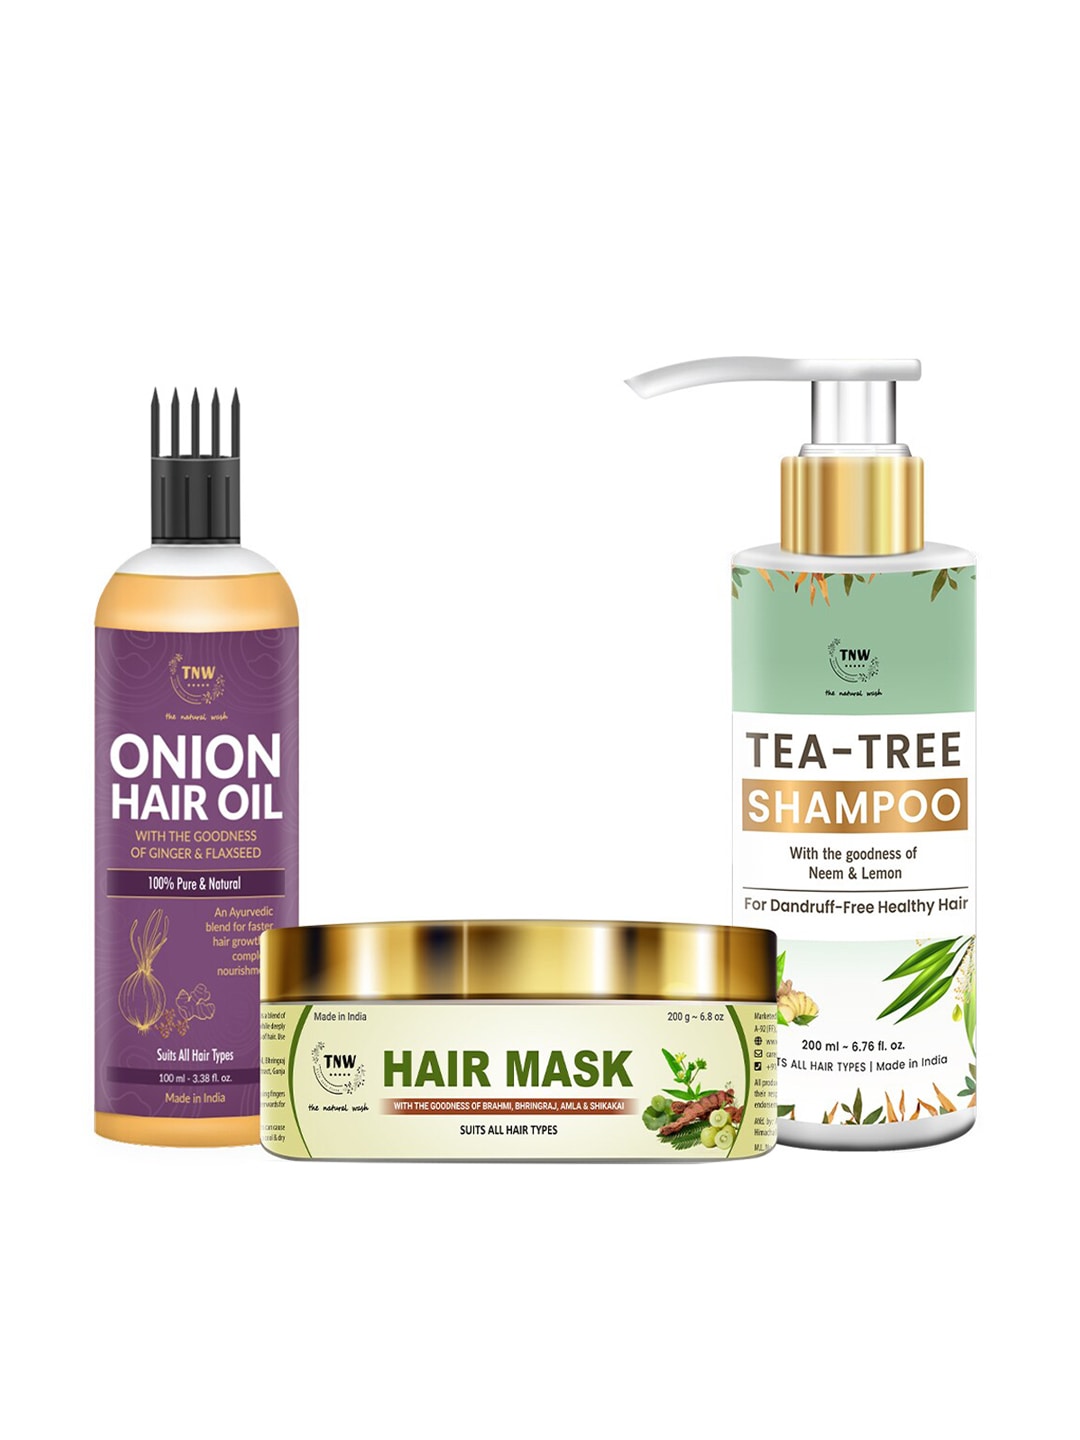 TNW the natural wash White Set of 3 Hair Care Kit Price in India